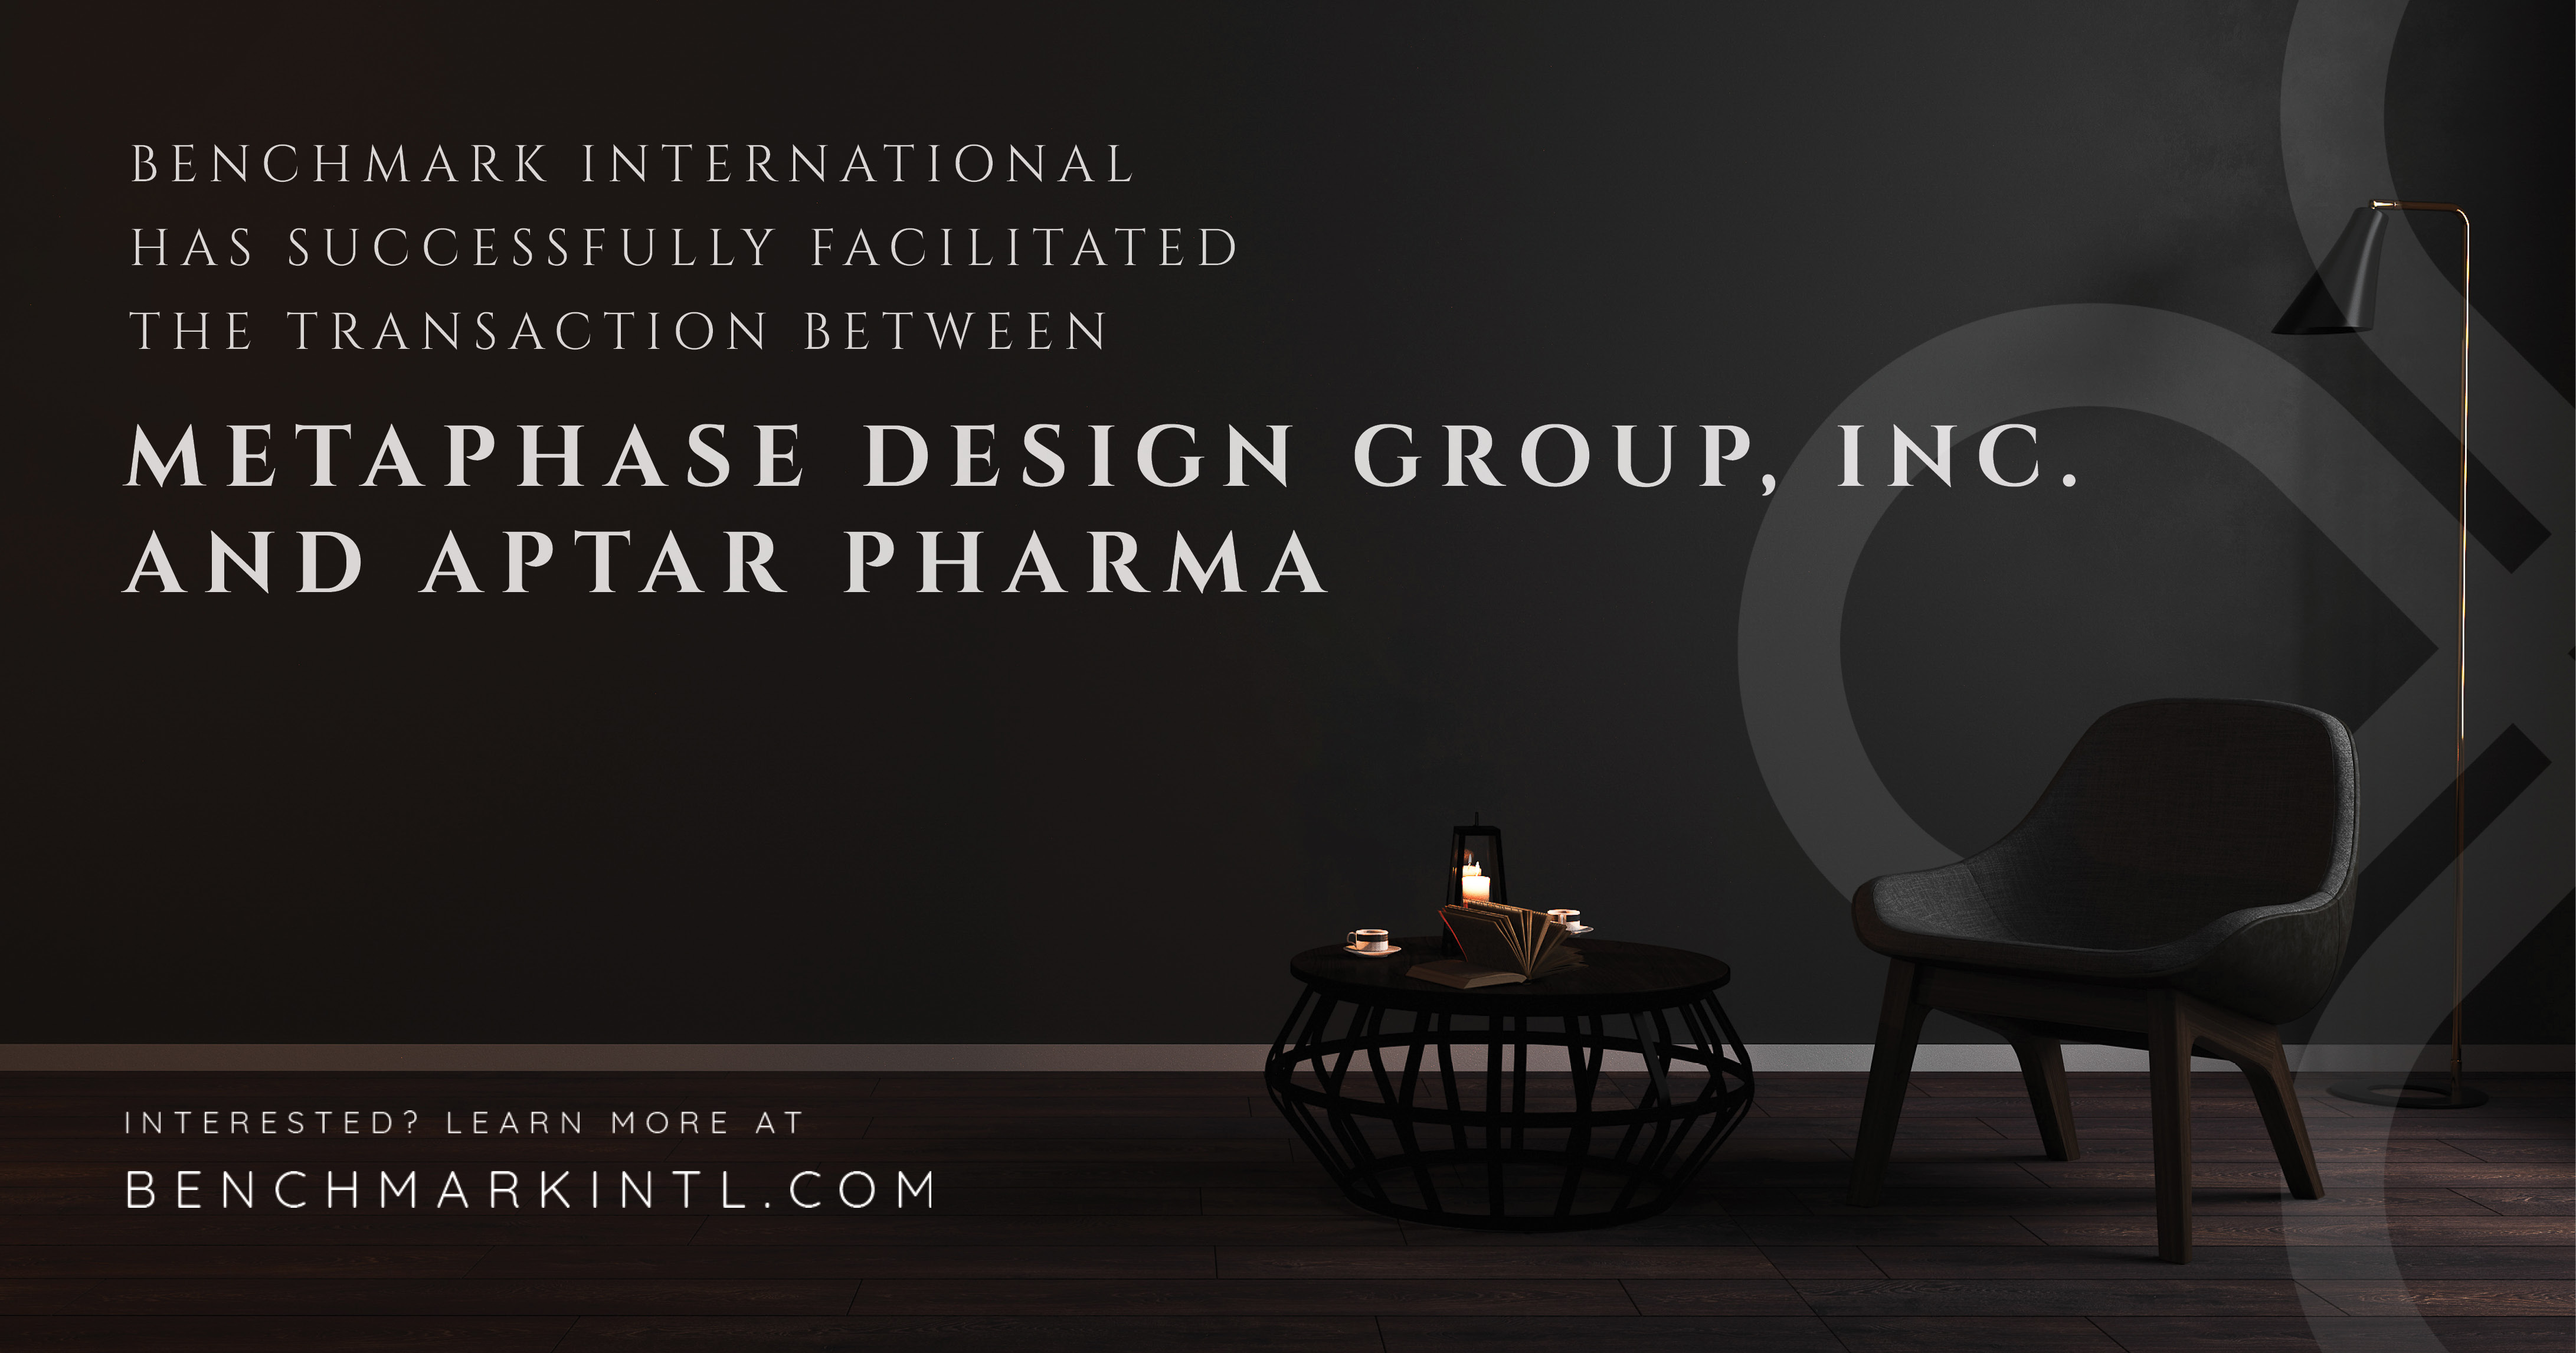 Benchmark International has Successfully Facilitated the Transaction Between Metaphase Design Group, Inc. and Aptar Pharma